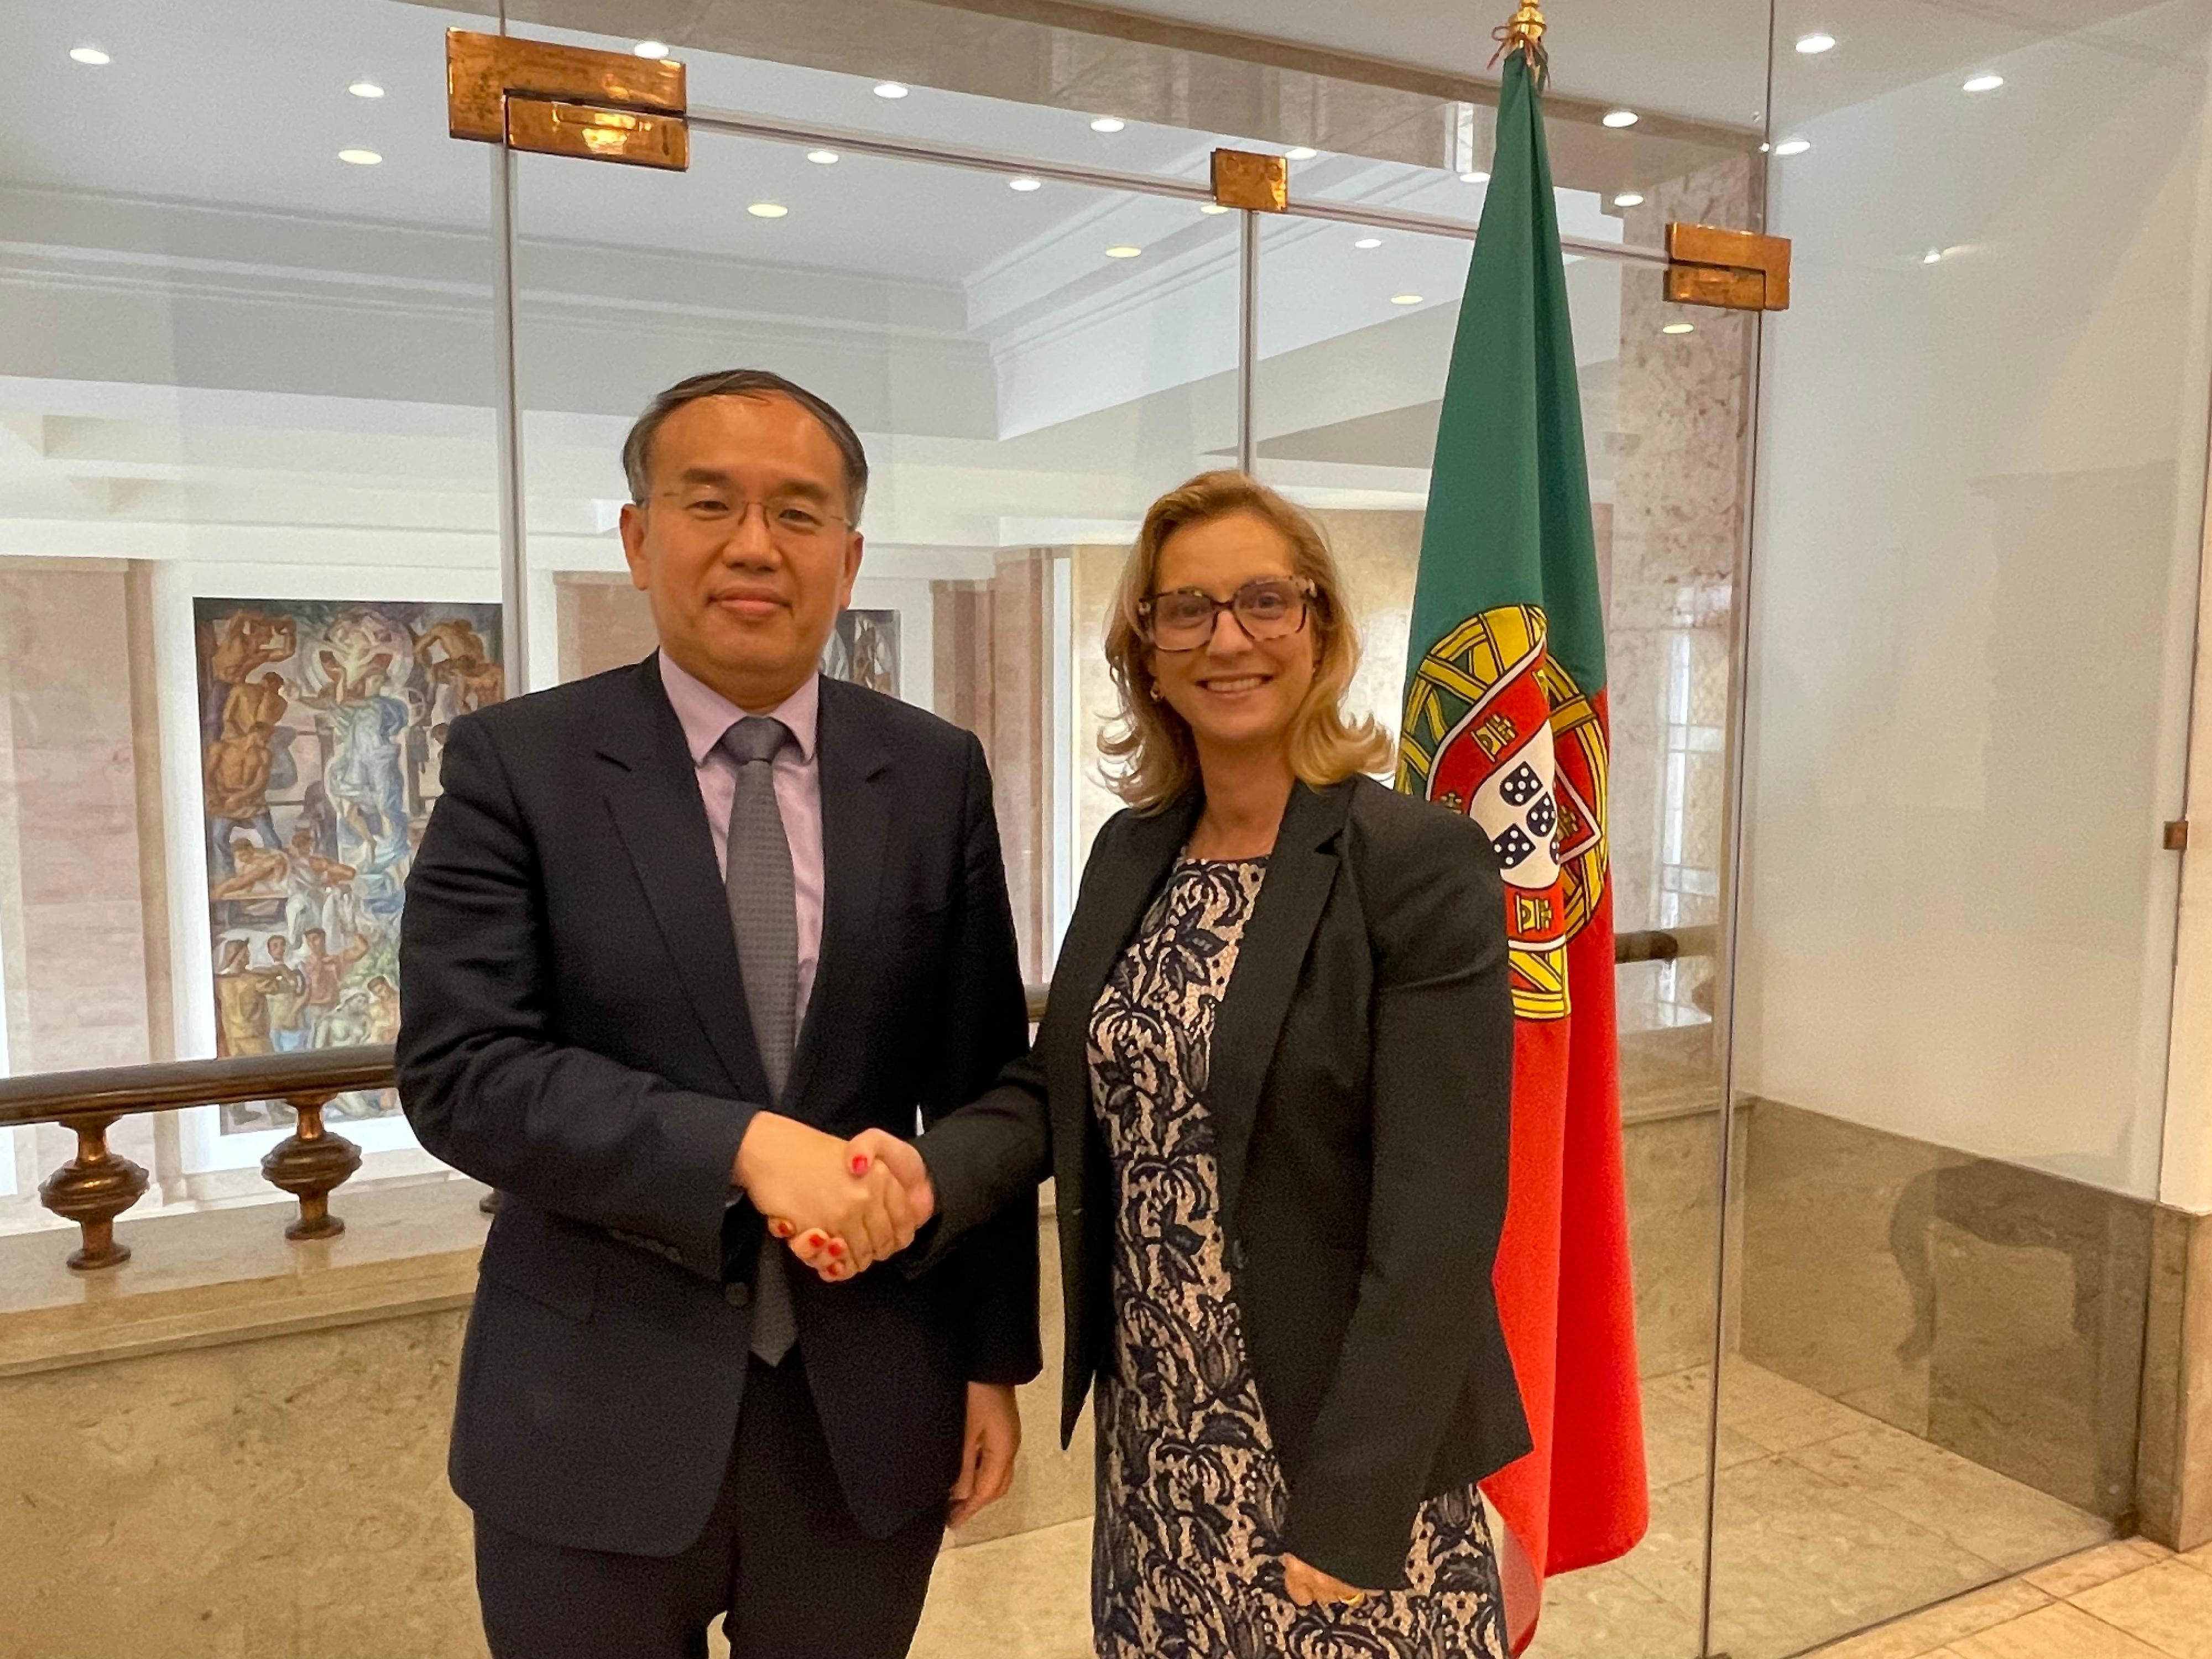 The Secretary for Financial Services and the Treasury, Mr Christopher Hui, continued his visit to Europe. Photo shows Mr Hui (left) meeting with the Secretary of State for Tax Affairs of Portugal, Ms Cláudia Reis Duarte (right), in Lisbon, Portugal, on June 6 (Lisbon time).